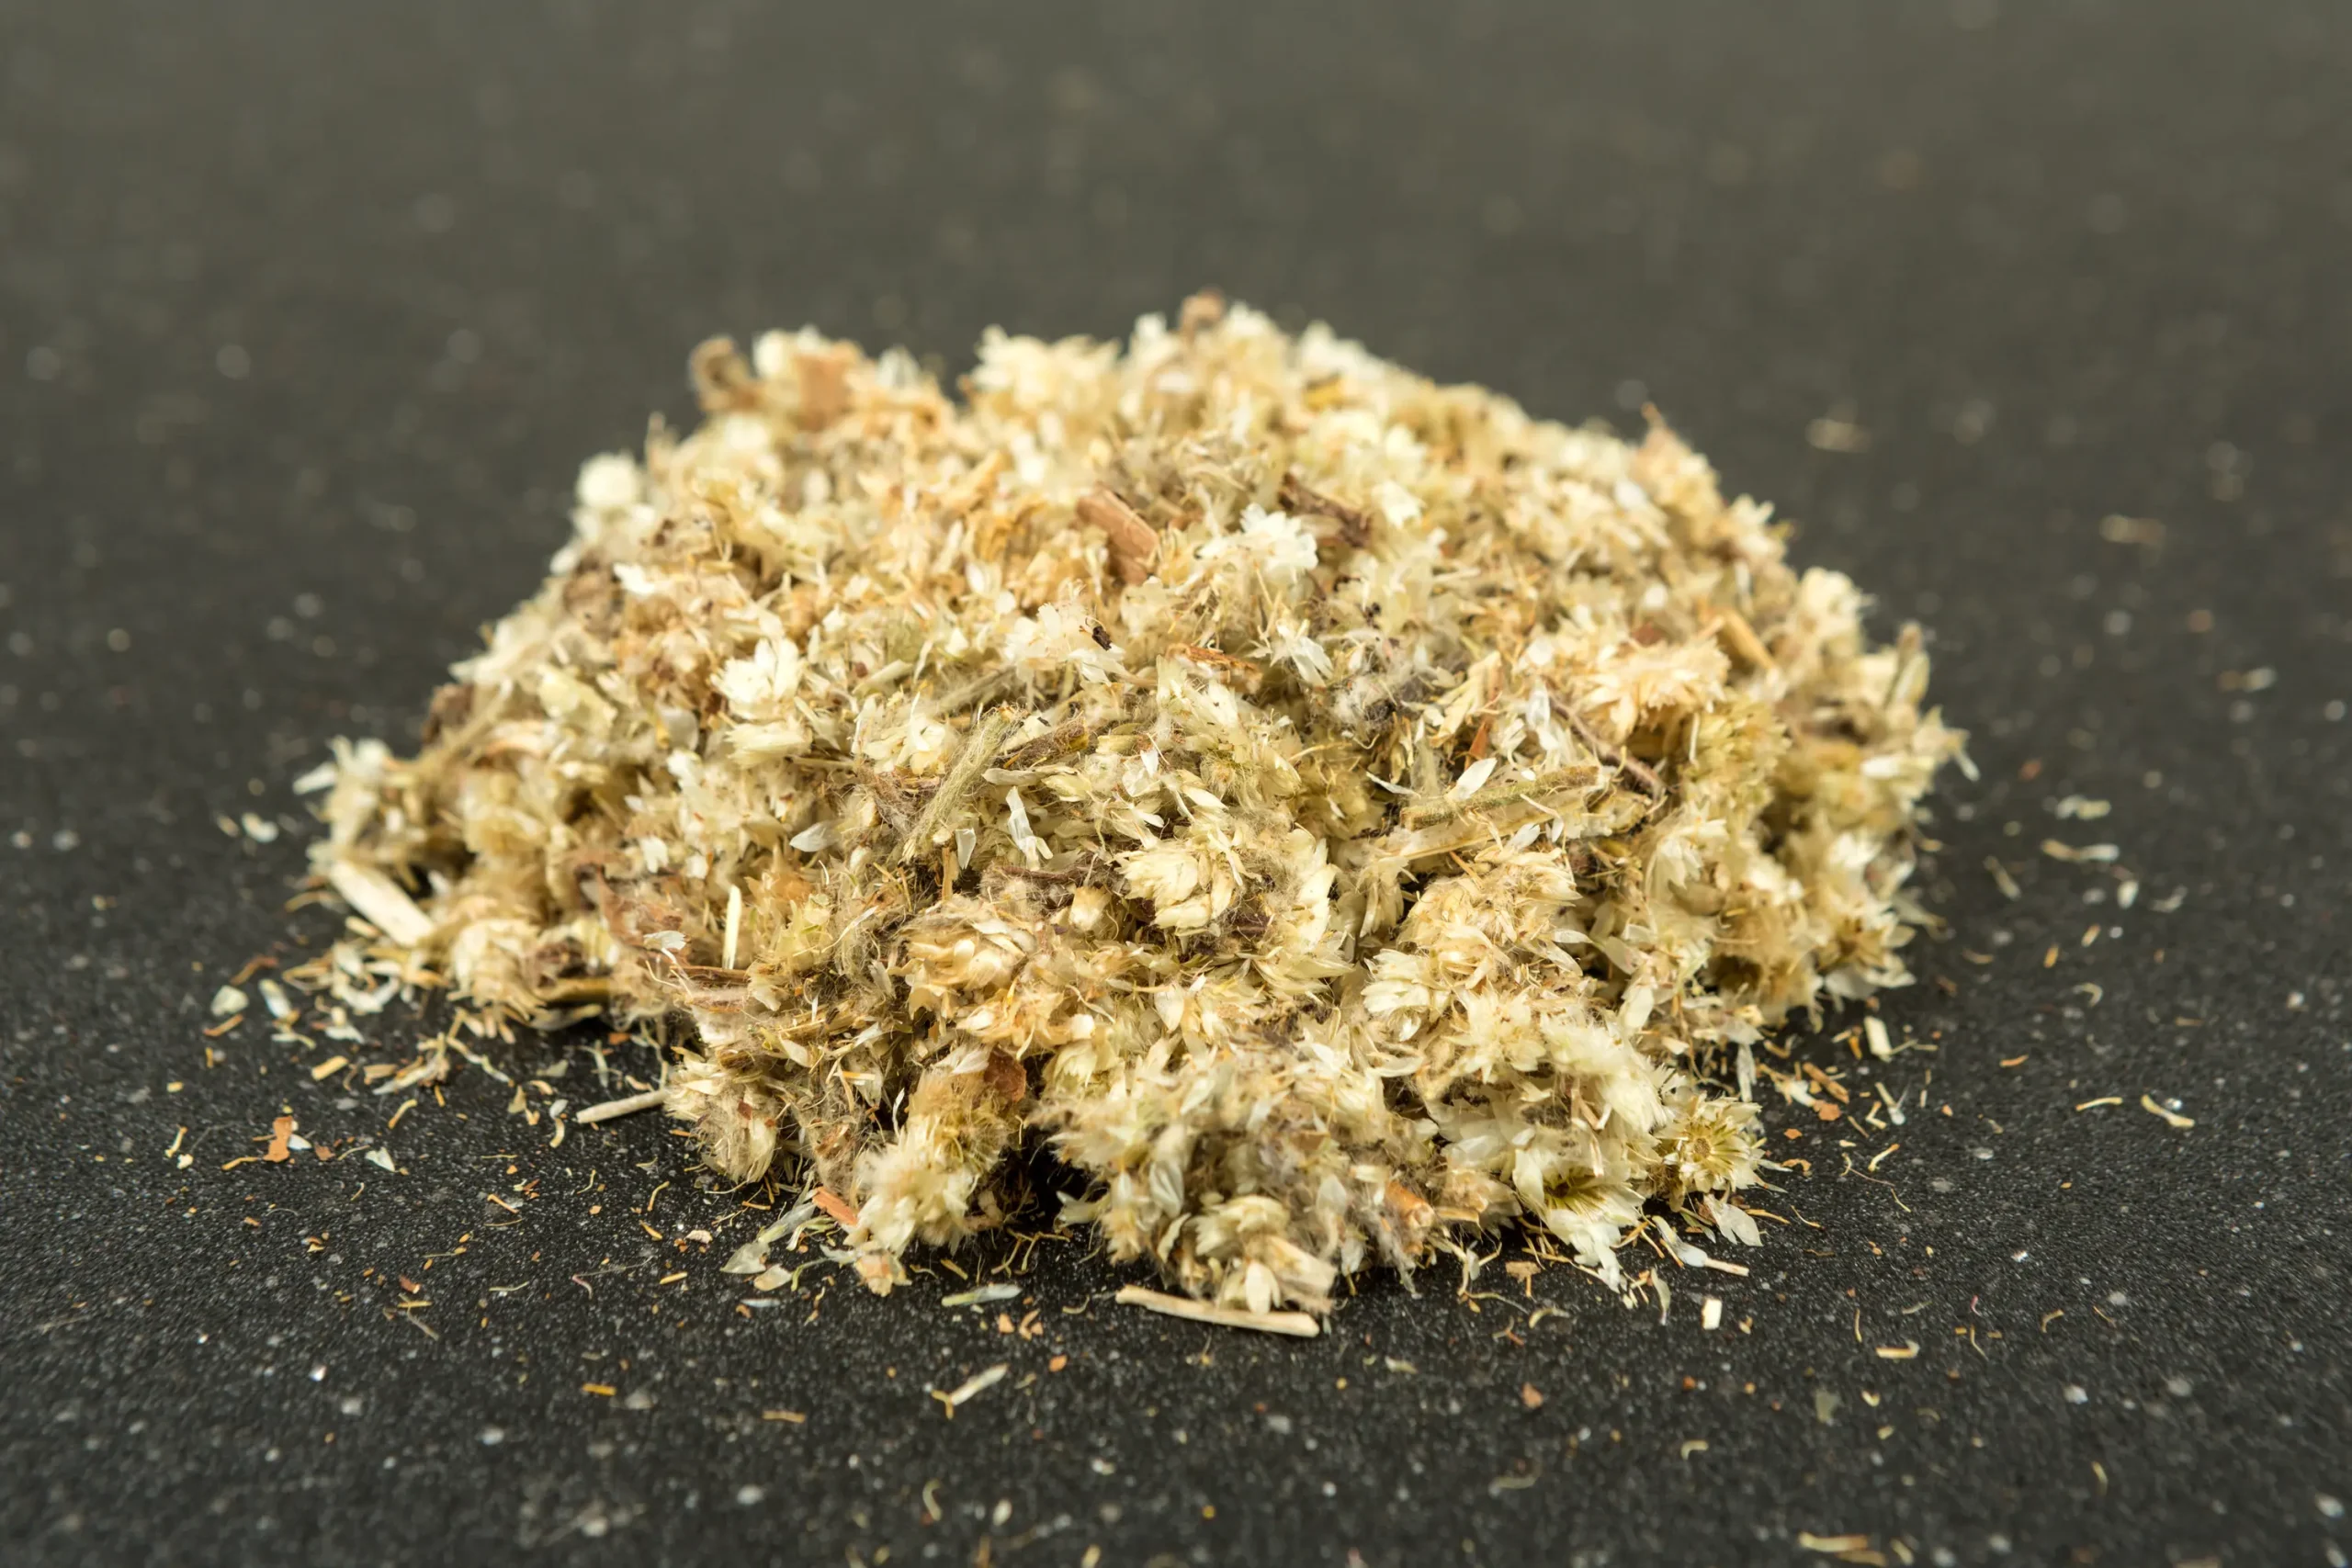 herbs that can be smoked - Is Calendula safe to smoke